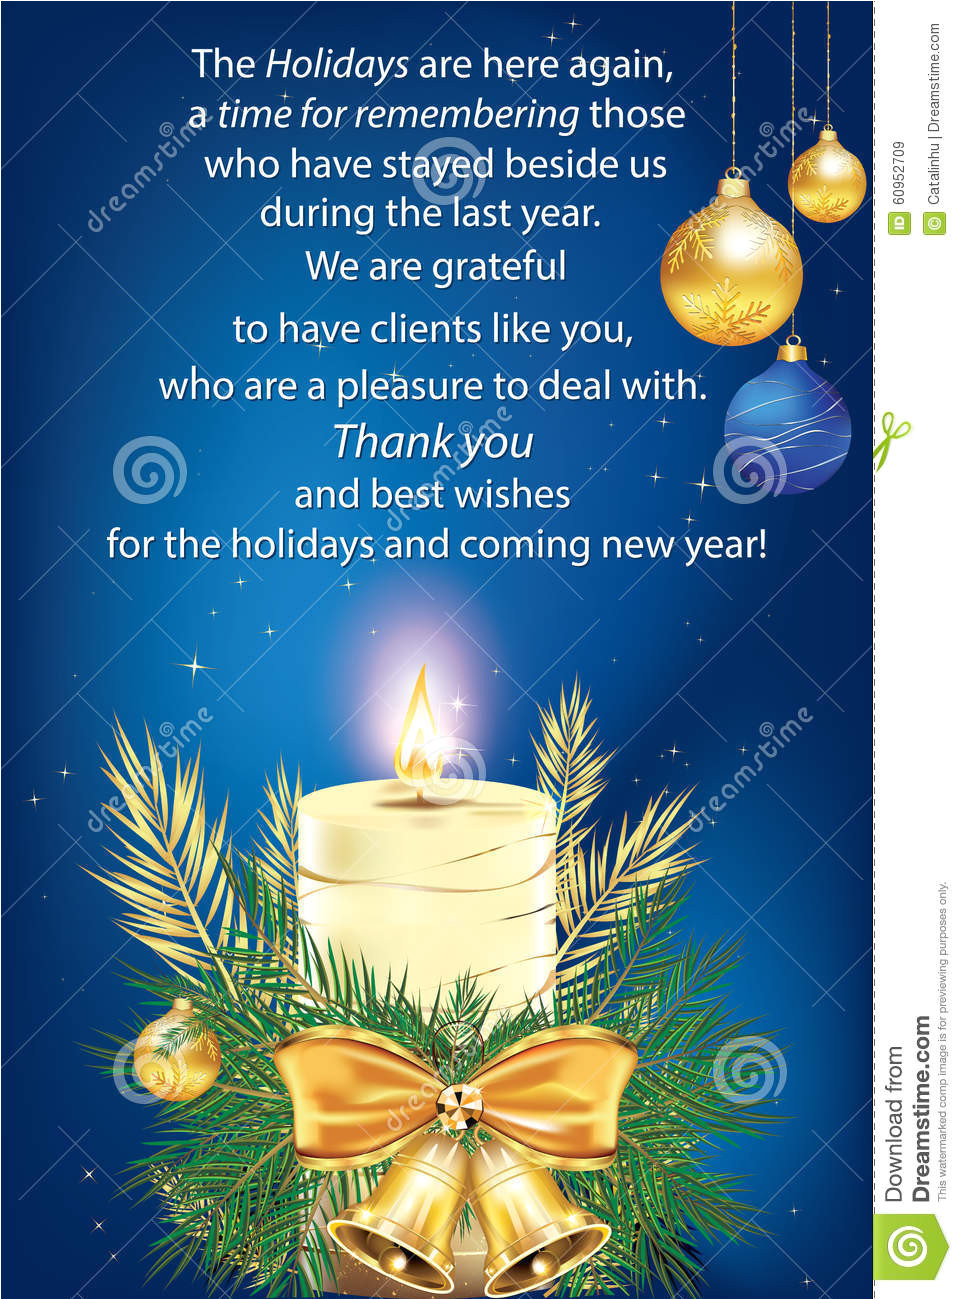 thank you blue business greeting card christmas new year especially created companies want to their clients 60952709 jpg